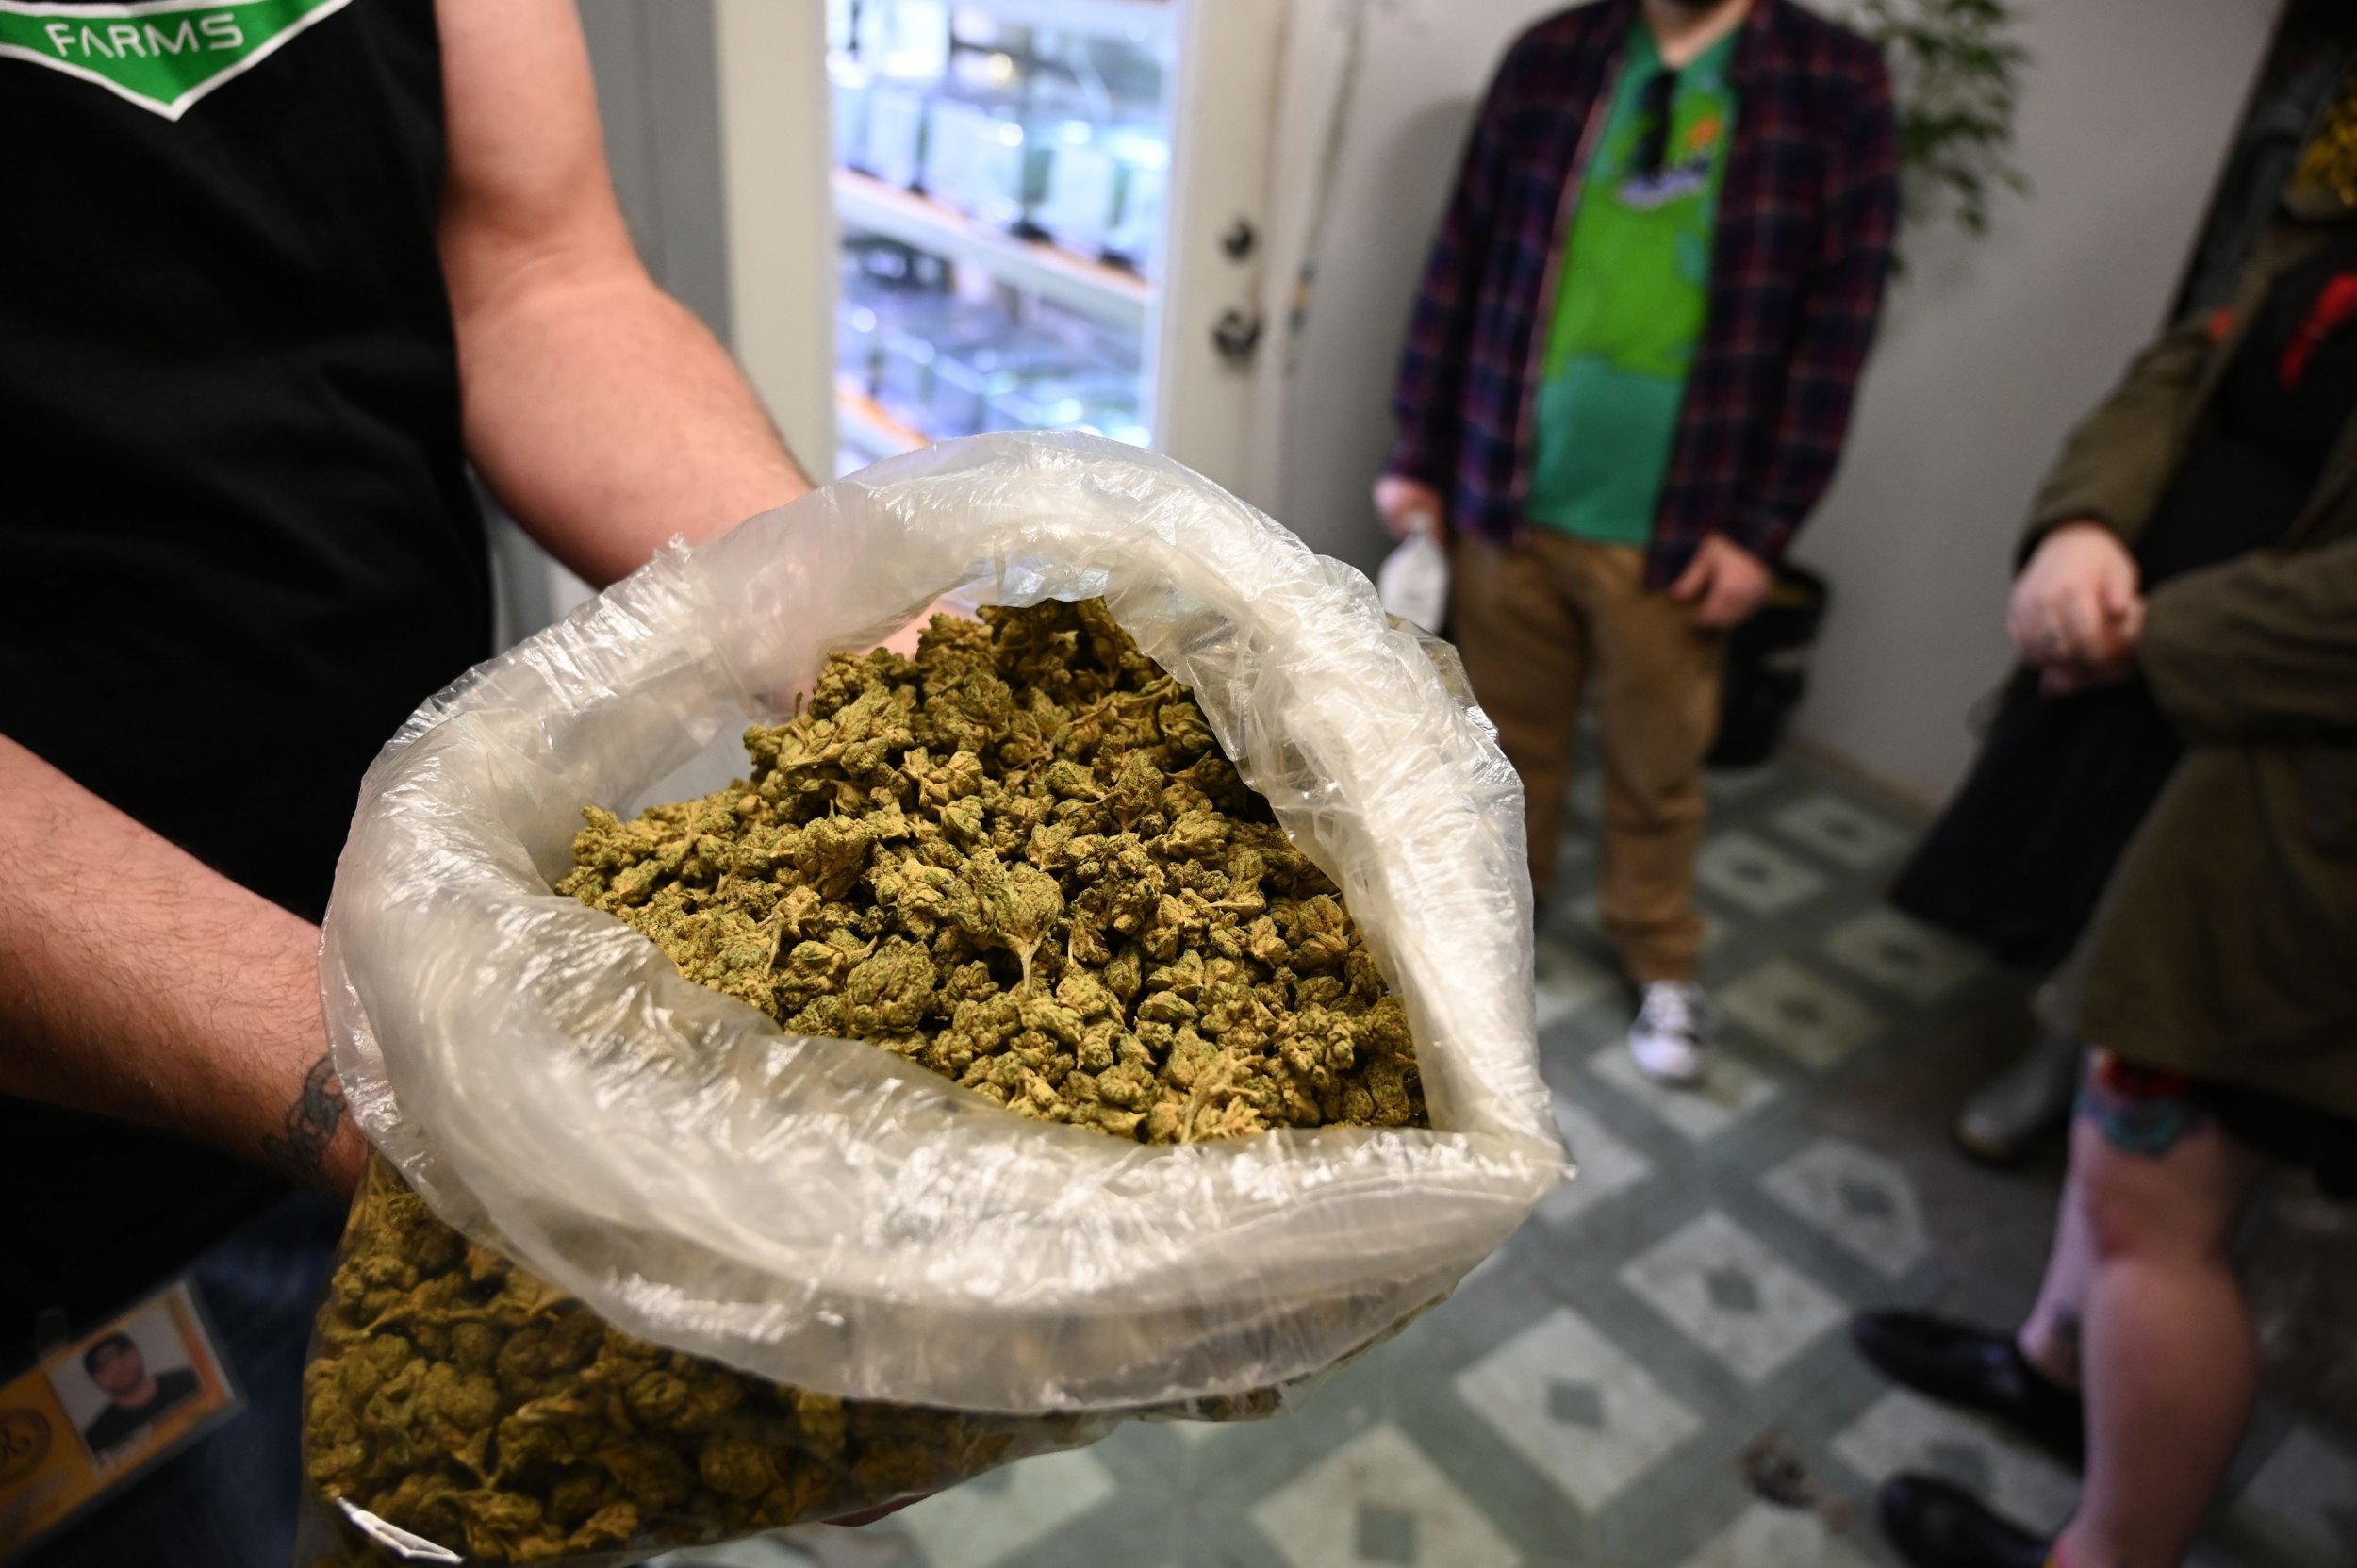 California Marijuana Growers Are Producing So Much Weed They Could Crash the Market: Report